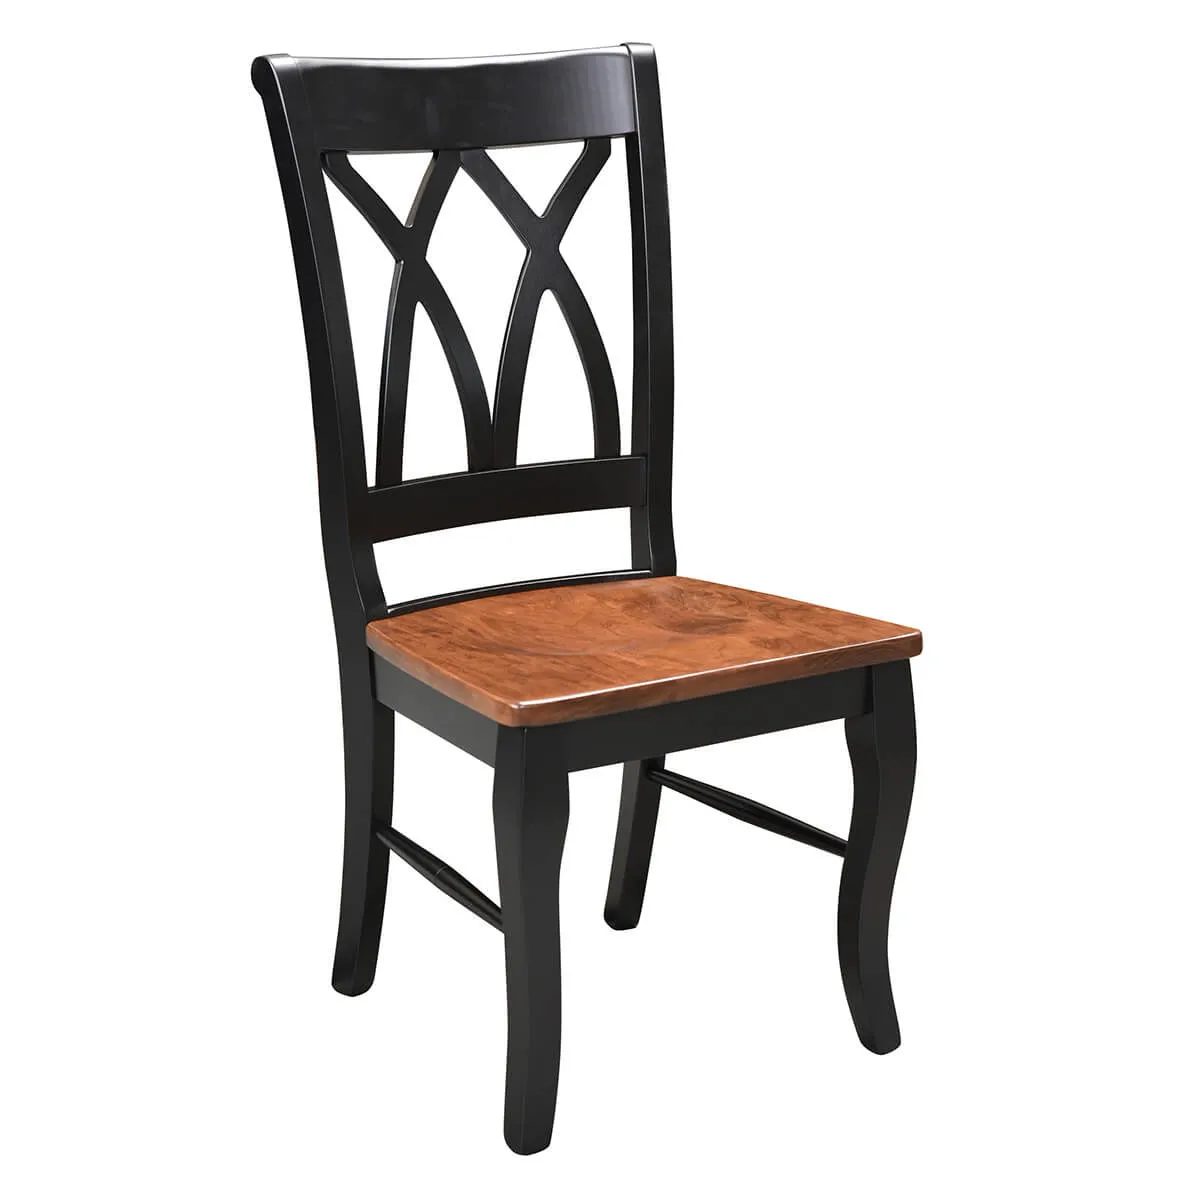 Stanton Side Chair